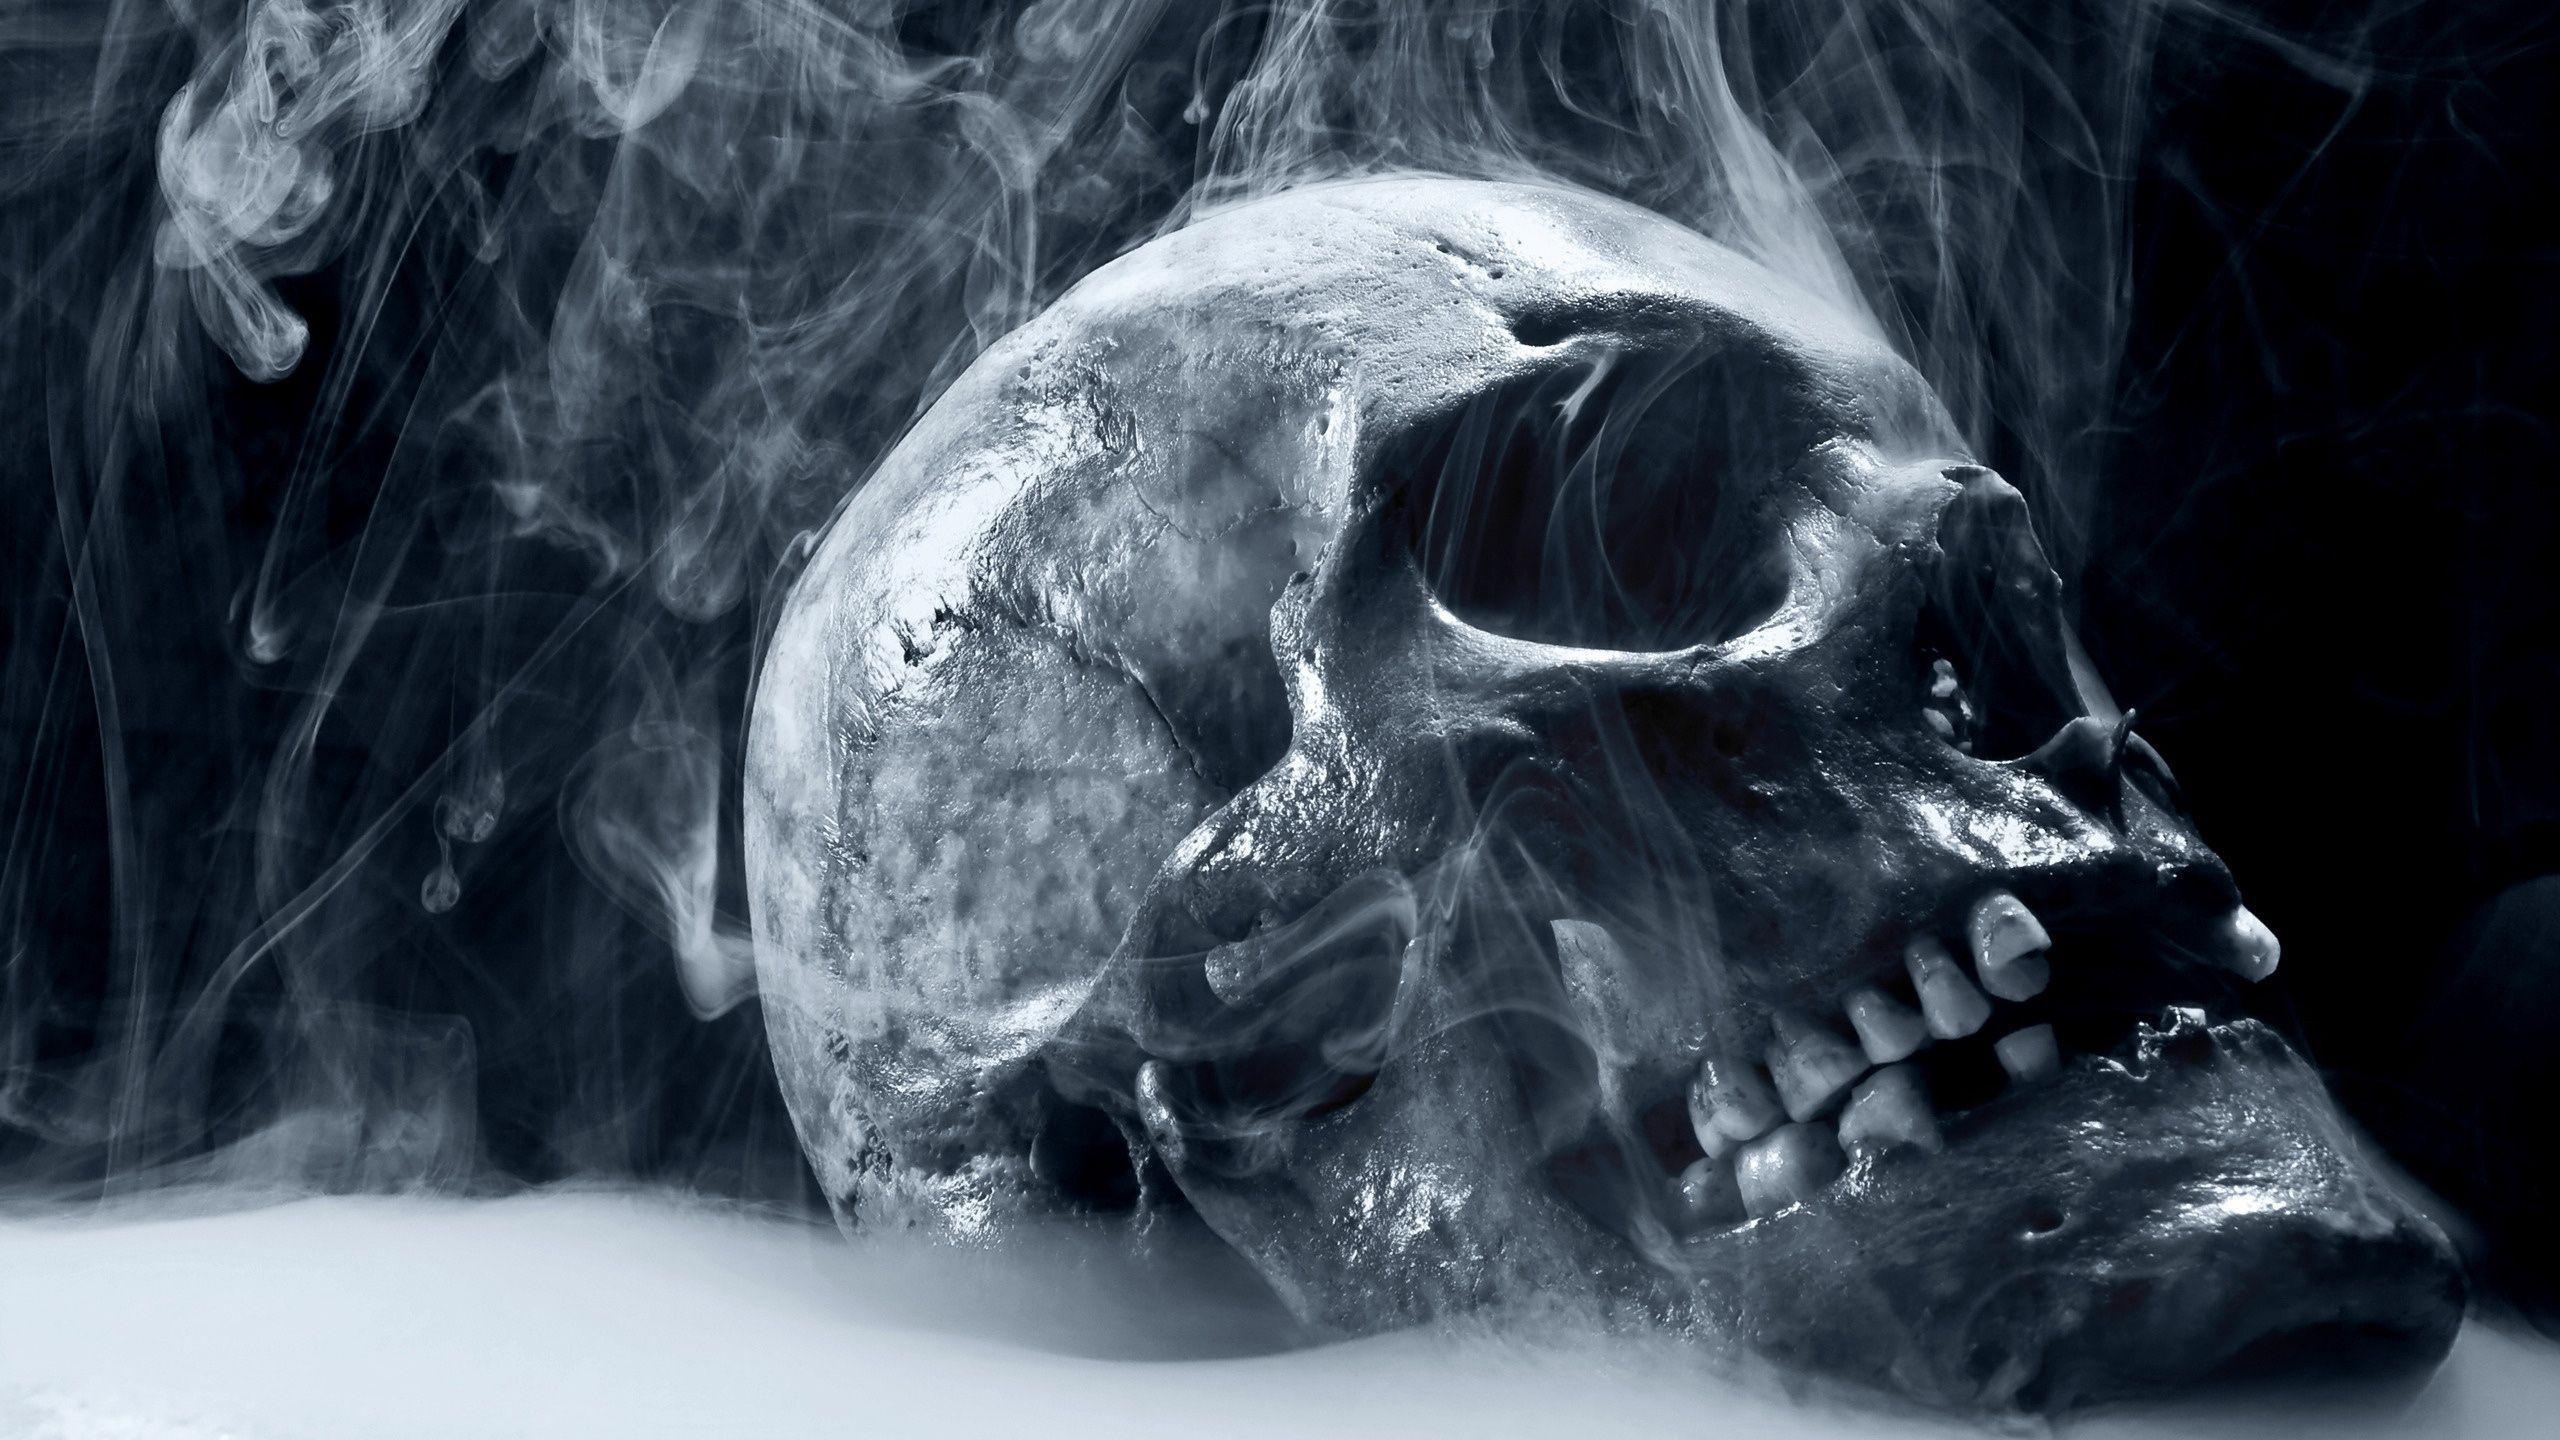 Gothic / Dark Art: Skull Smoking, picture nr. 61171. Love Quotes